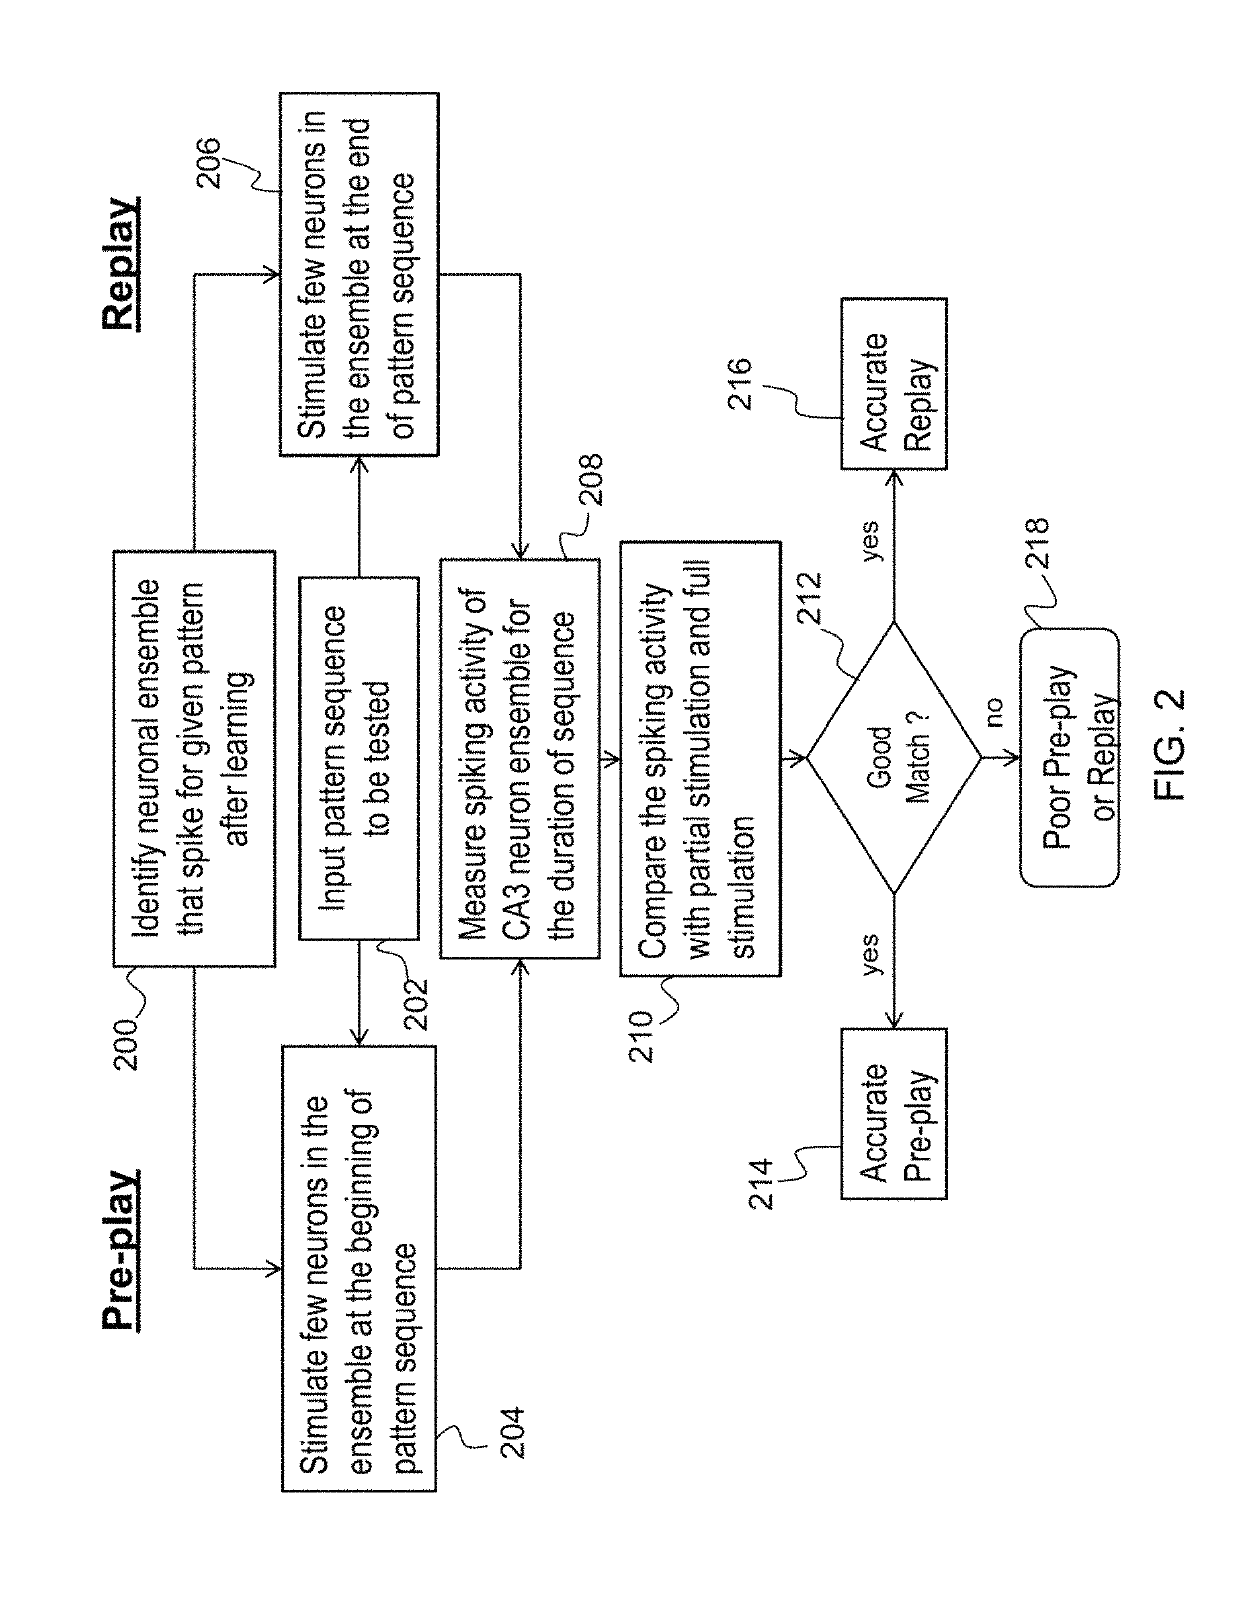 Method and apparatus for learning, prediction, and recall of spatiotemporal patterns